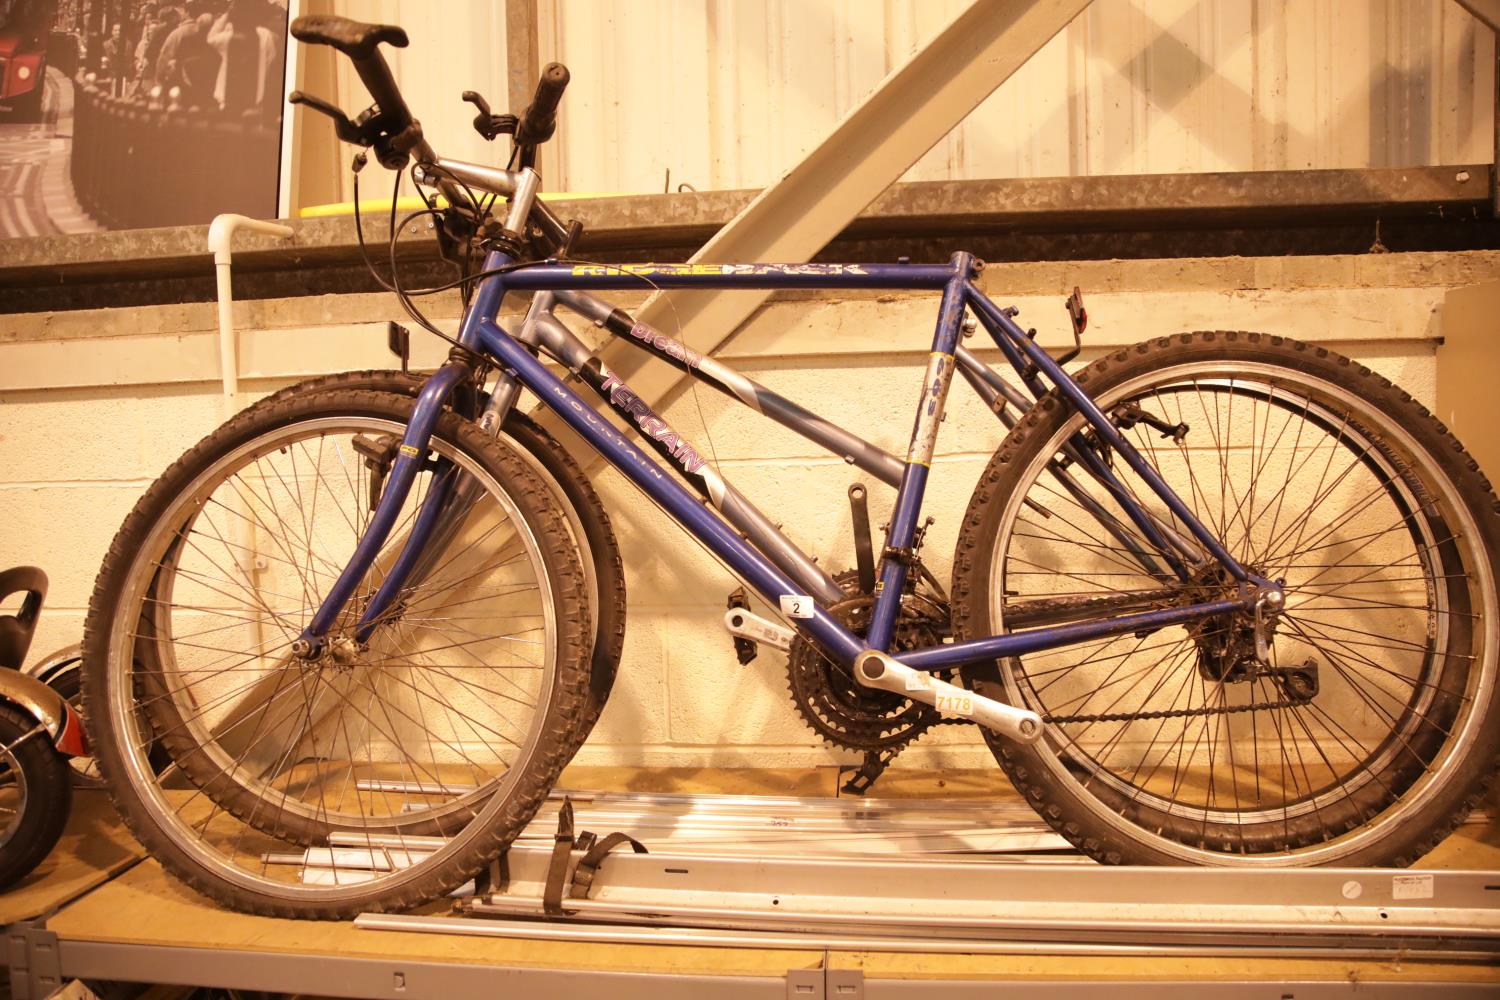 Two mountain bikes in need of remedial repairs. Not available for in-house P&P.